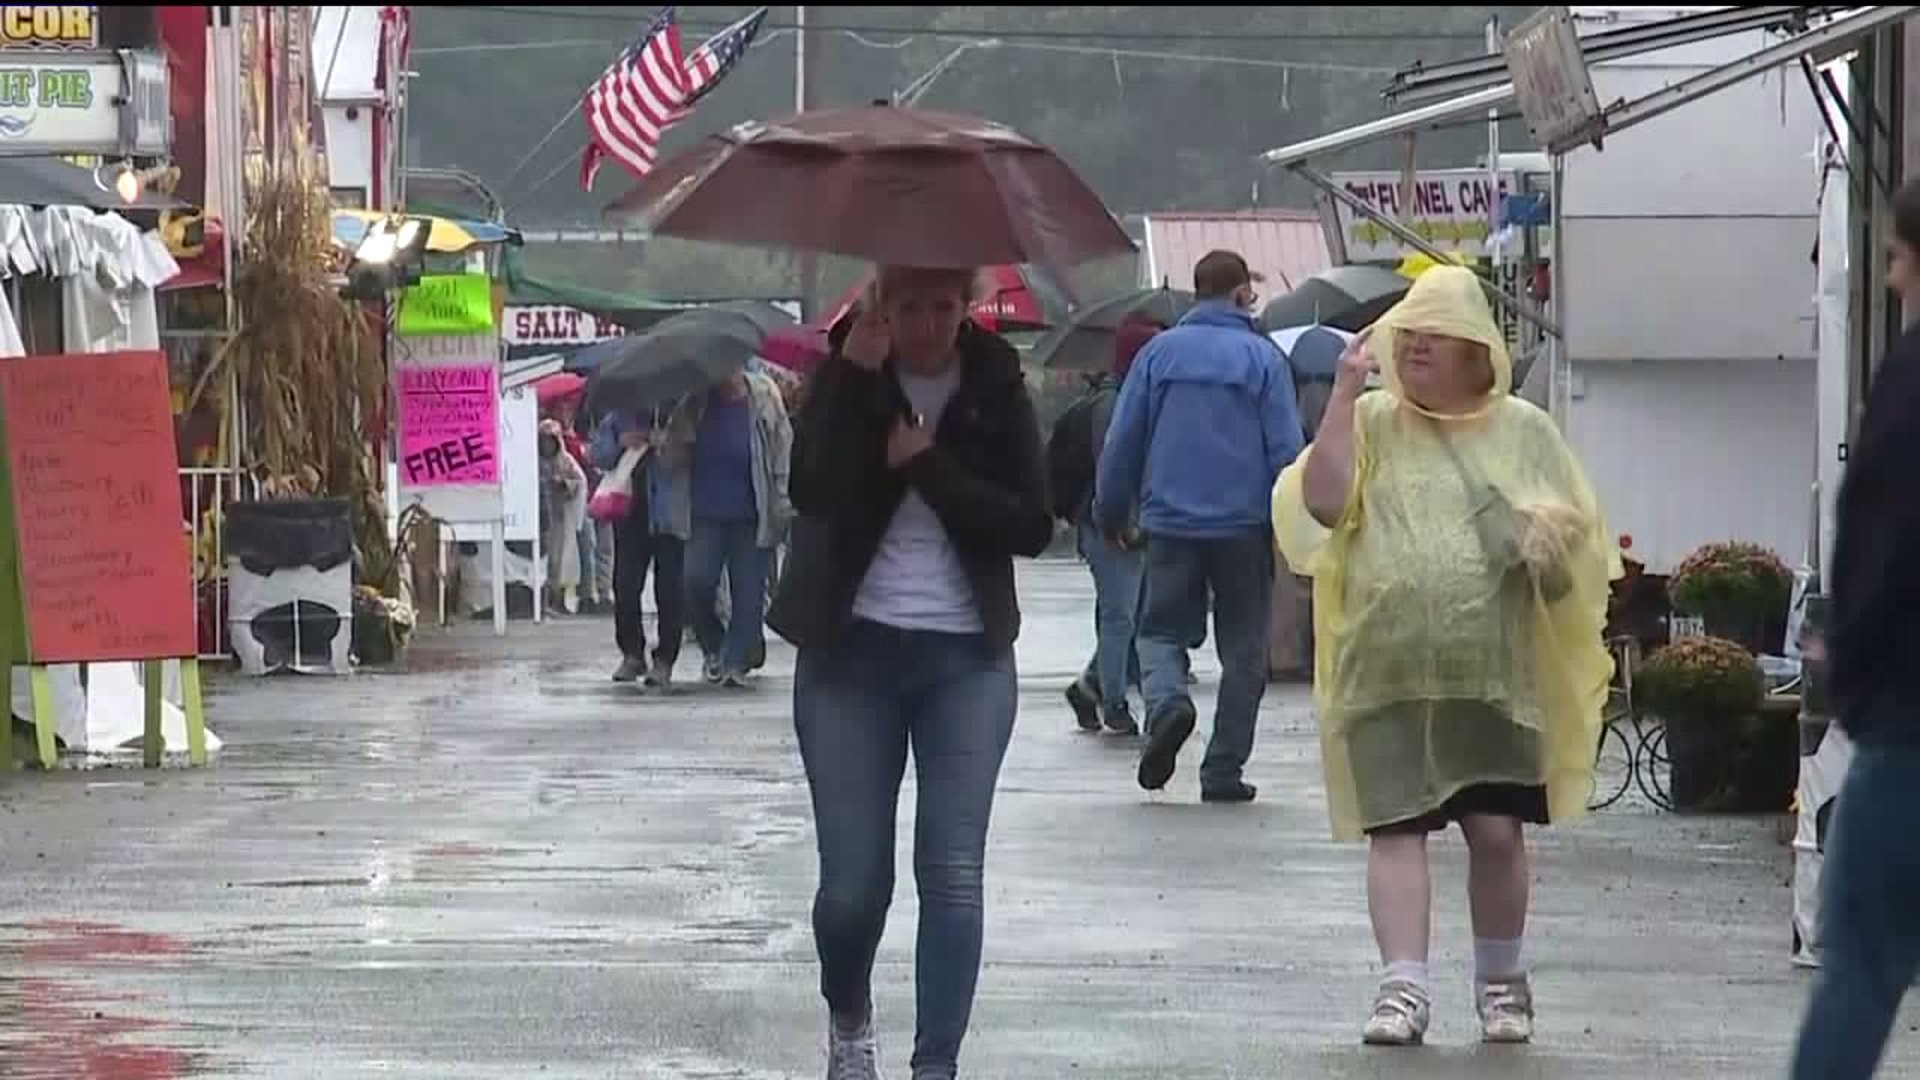 Vendors Content with Wet Weather at Bloomsburg Fair